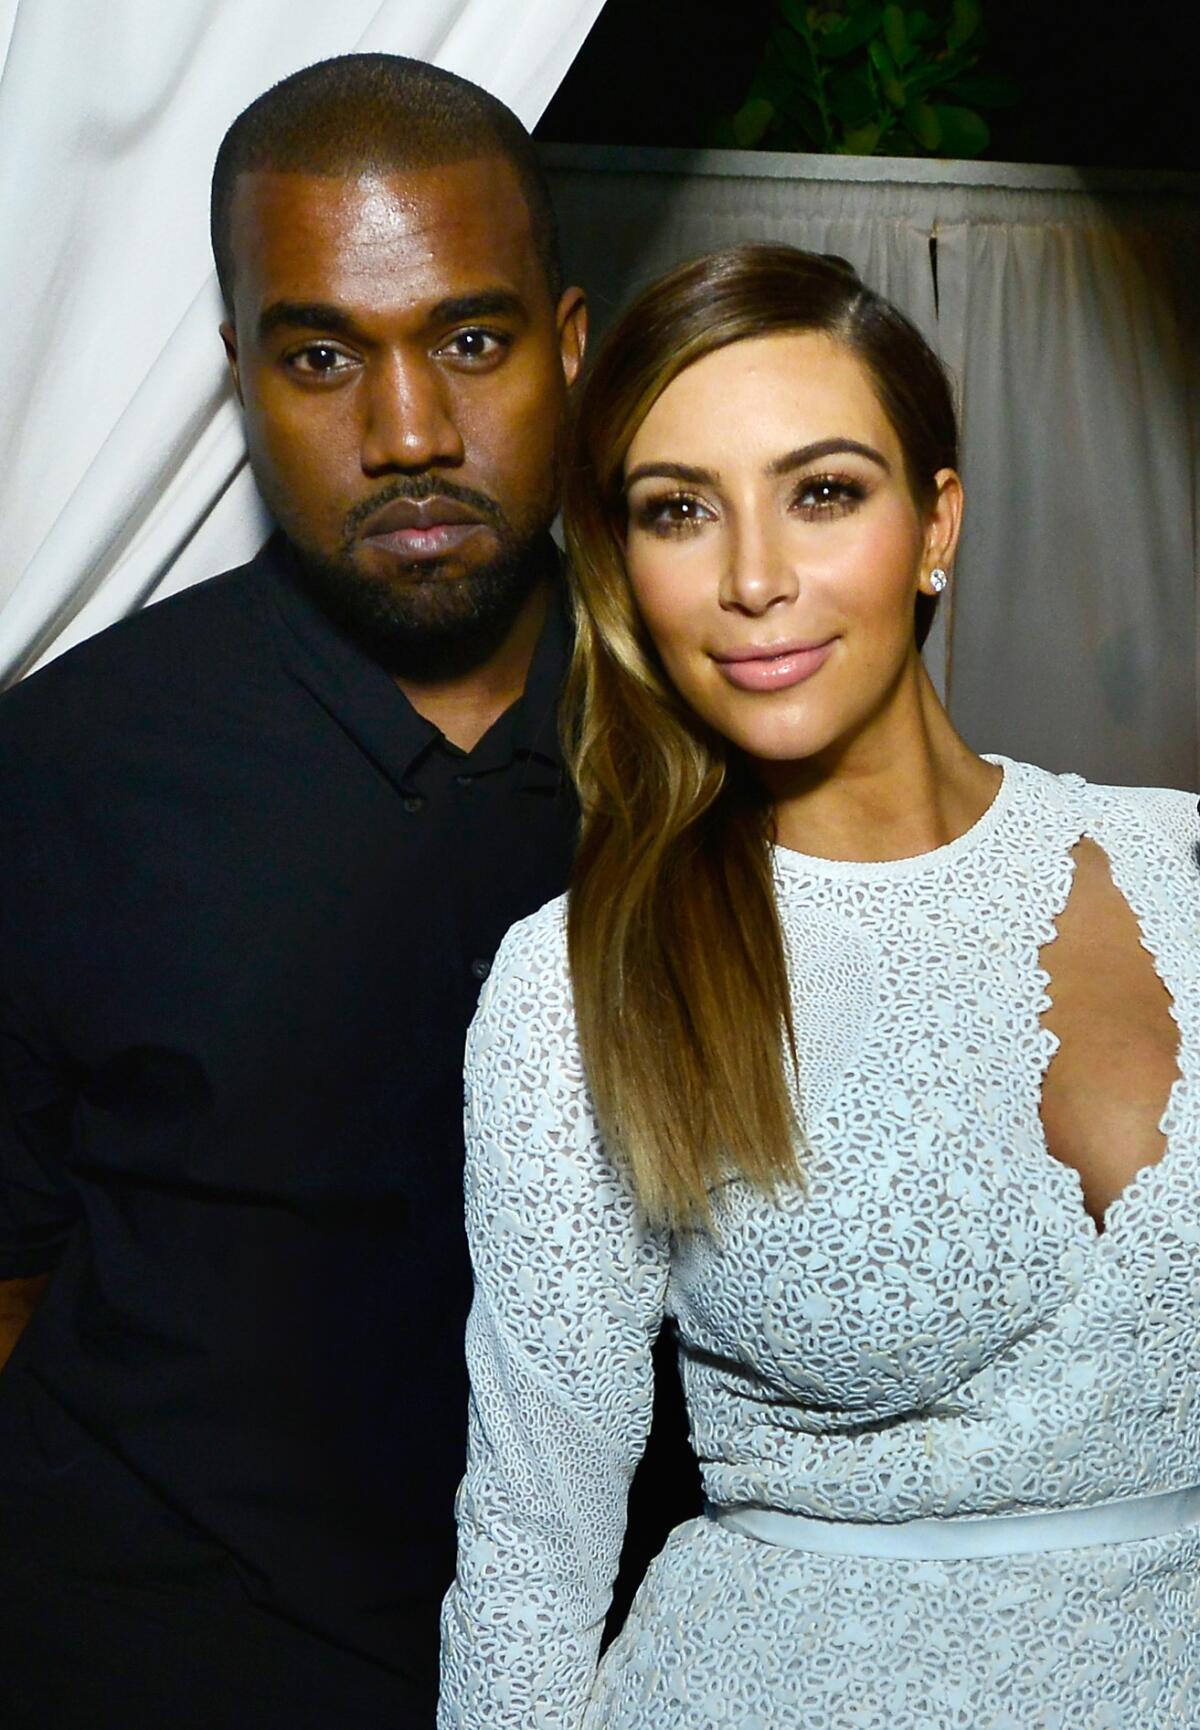 Kanye West and Kim Kardashian are reportedly in escrow on a $20-million estate in Hidden Hills, only a few minutes away from her mom's home in Calabasas.